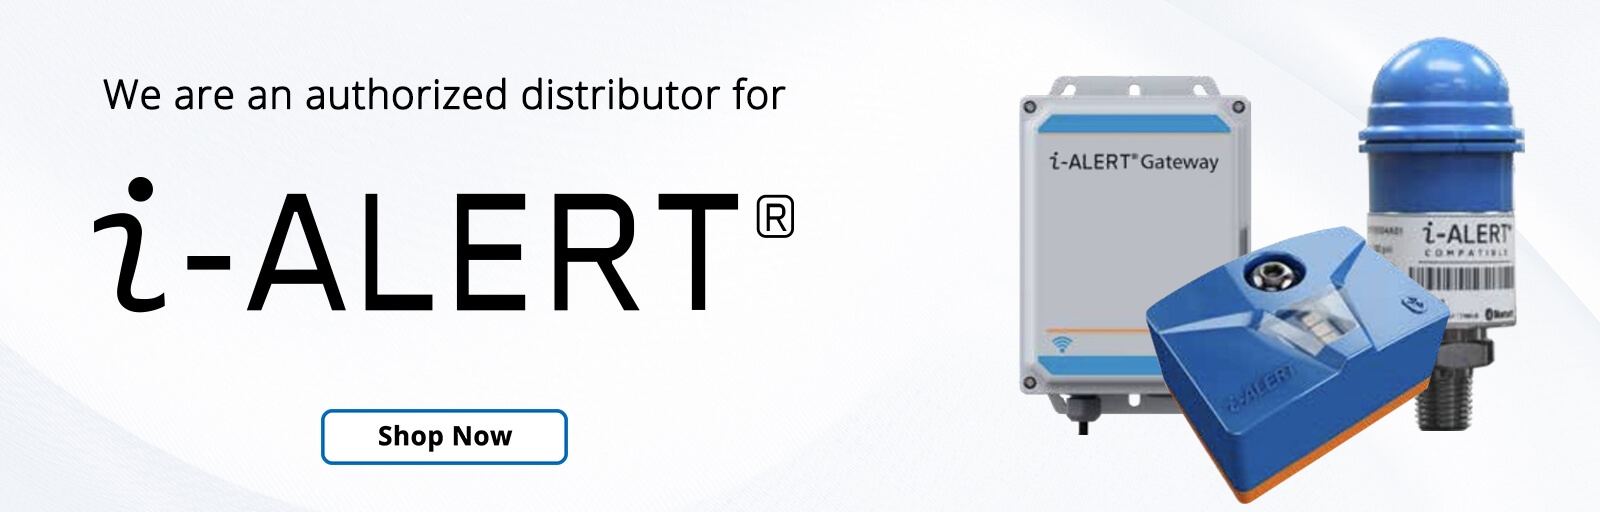 Radwell is an authorized distributor for i-Alert